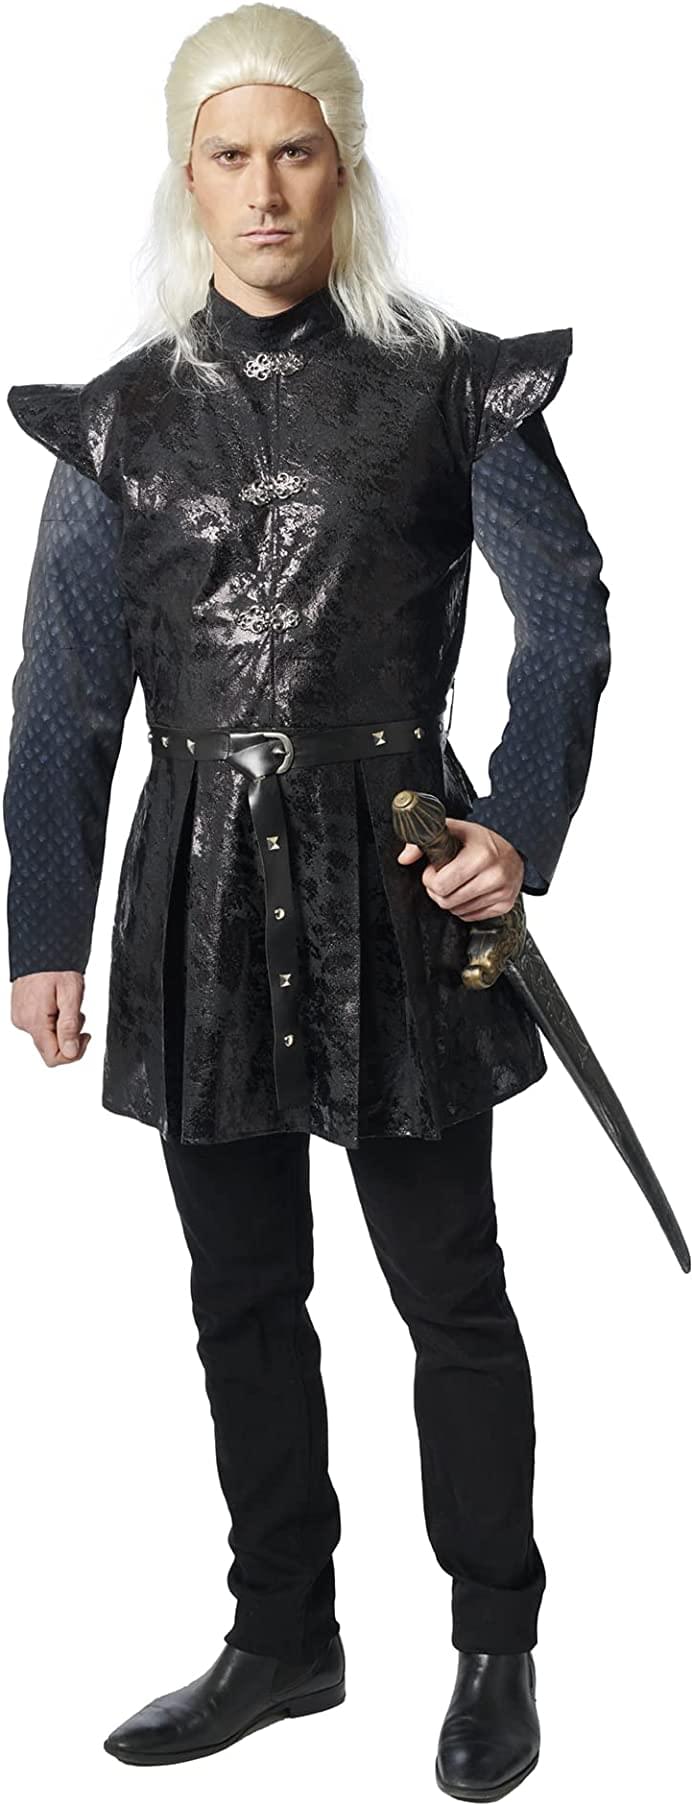 Ancient Prince Tunic Adult Costume , X-Large